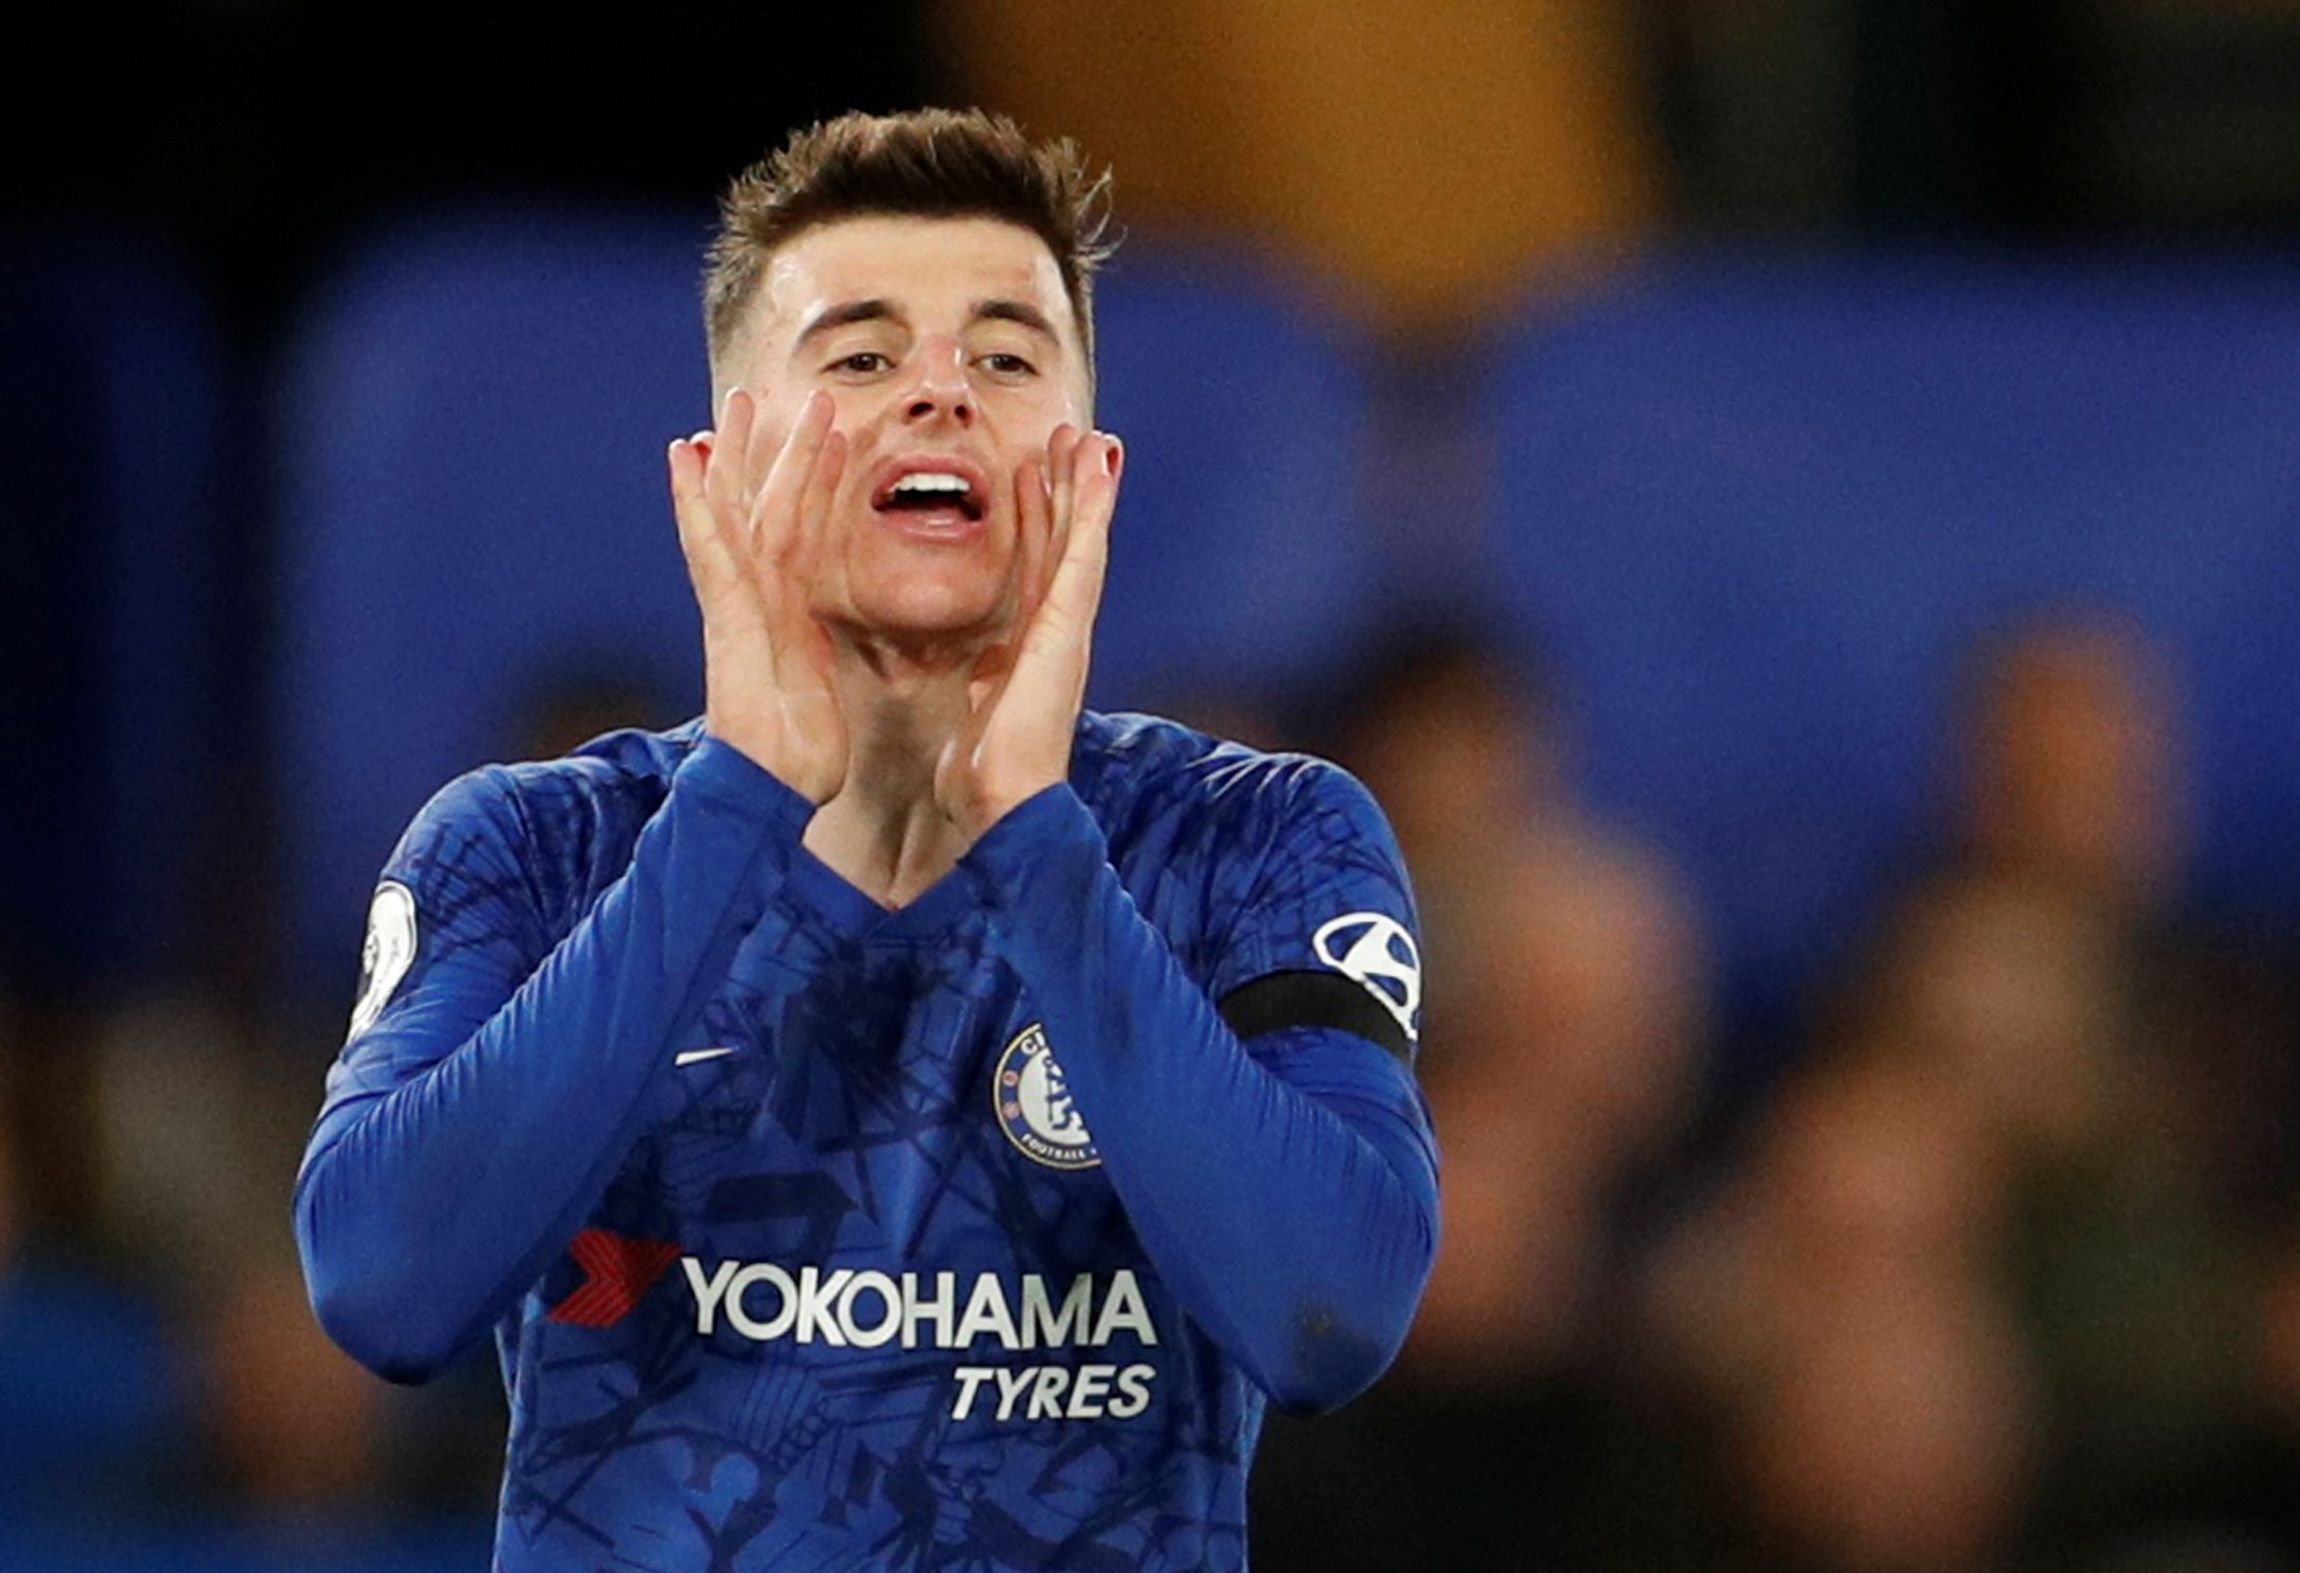 Soccer Football - Premier League - Chelsea v West Ham United - Stamford Bridge, London, Britain - November 30, 2019  Chelsea's Mason Mount   Action Images via Reuters/John Sibley  EDITORIAL USE ONLY. No use with unauthorized audio, video, data, fixture lists, club/league logos or 